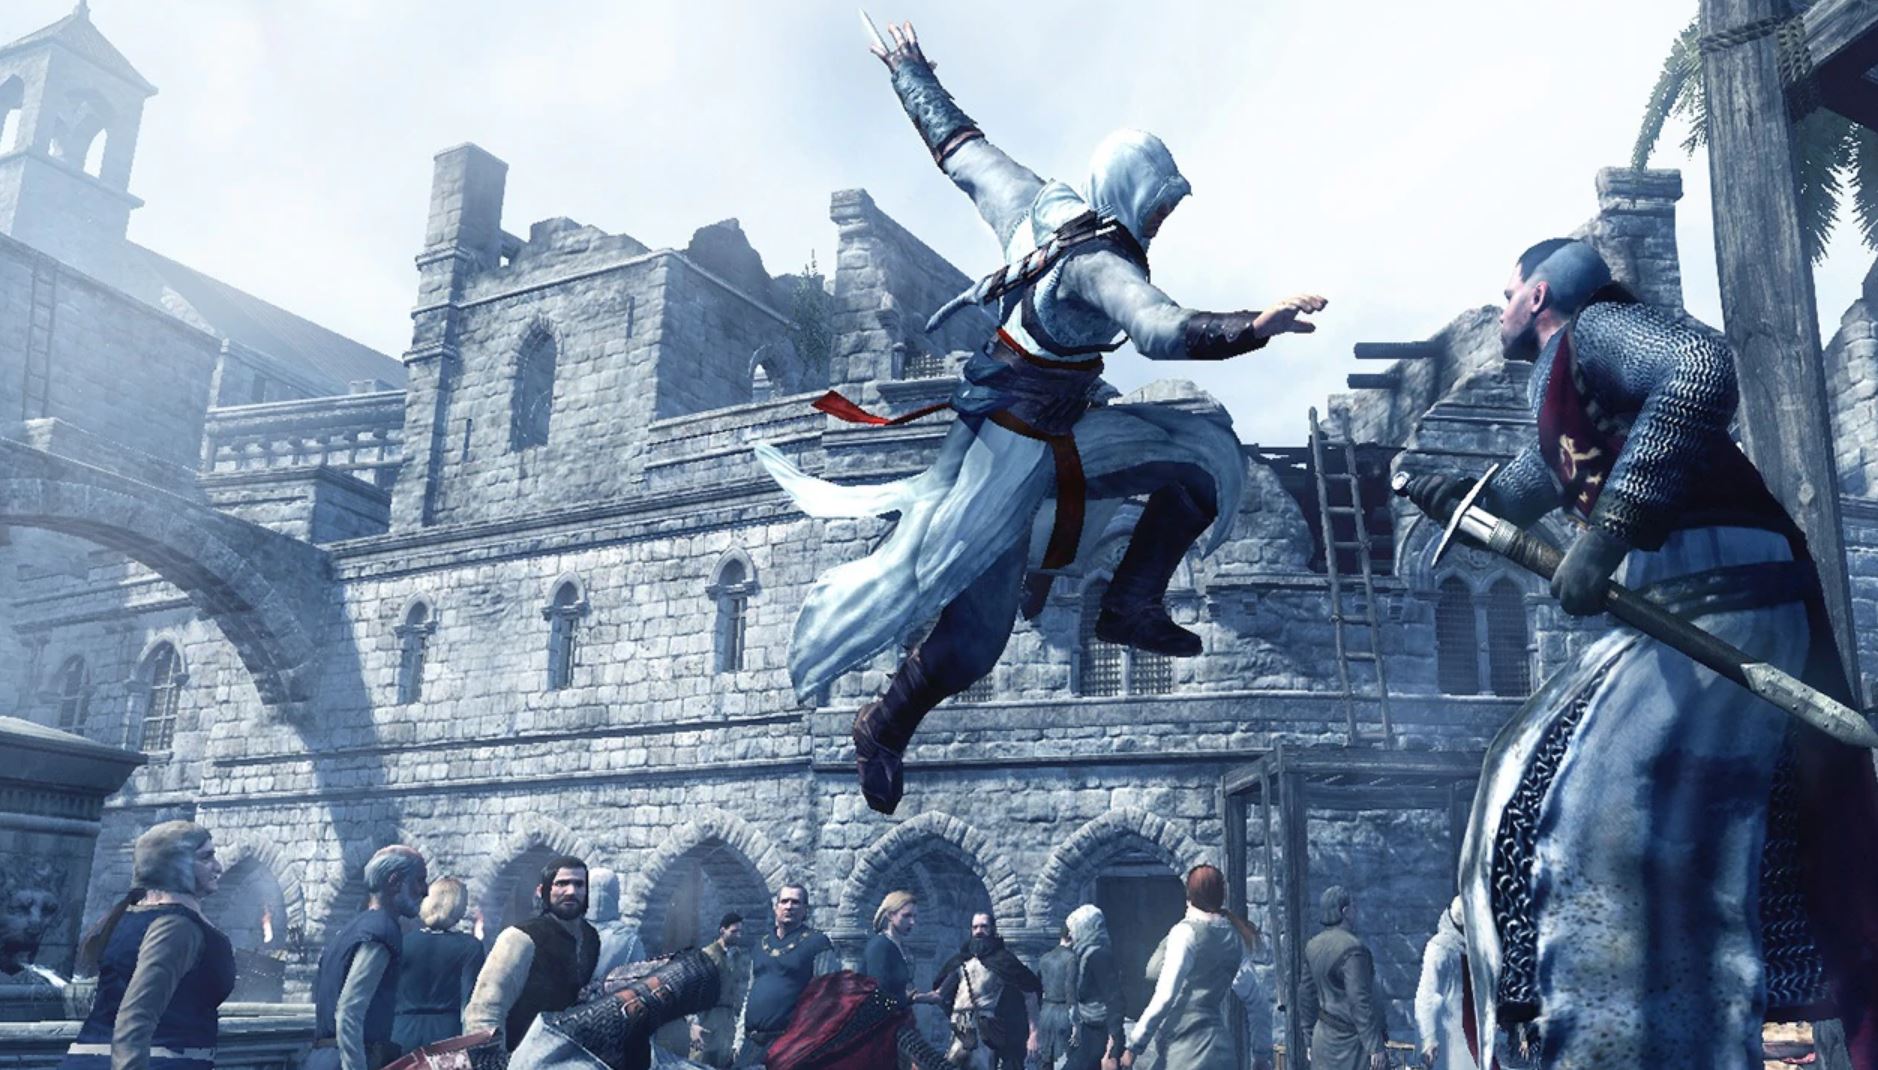 Where to next  Assassins creed, Assassin's creed, Assassins creed